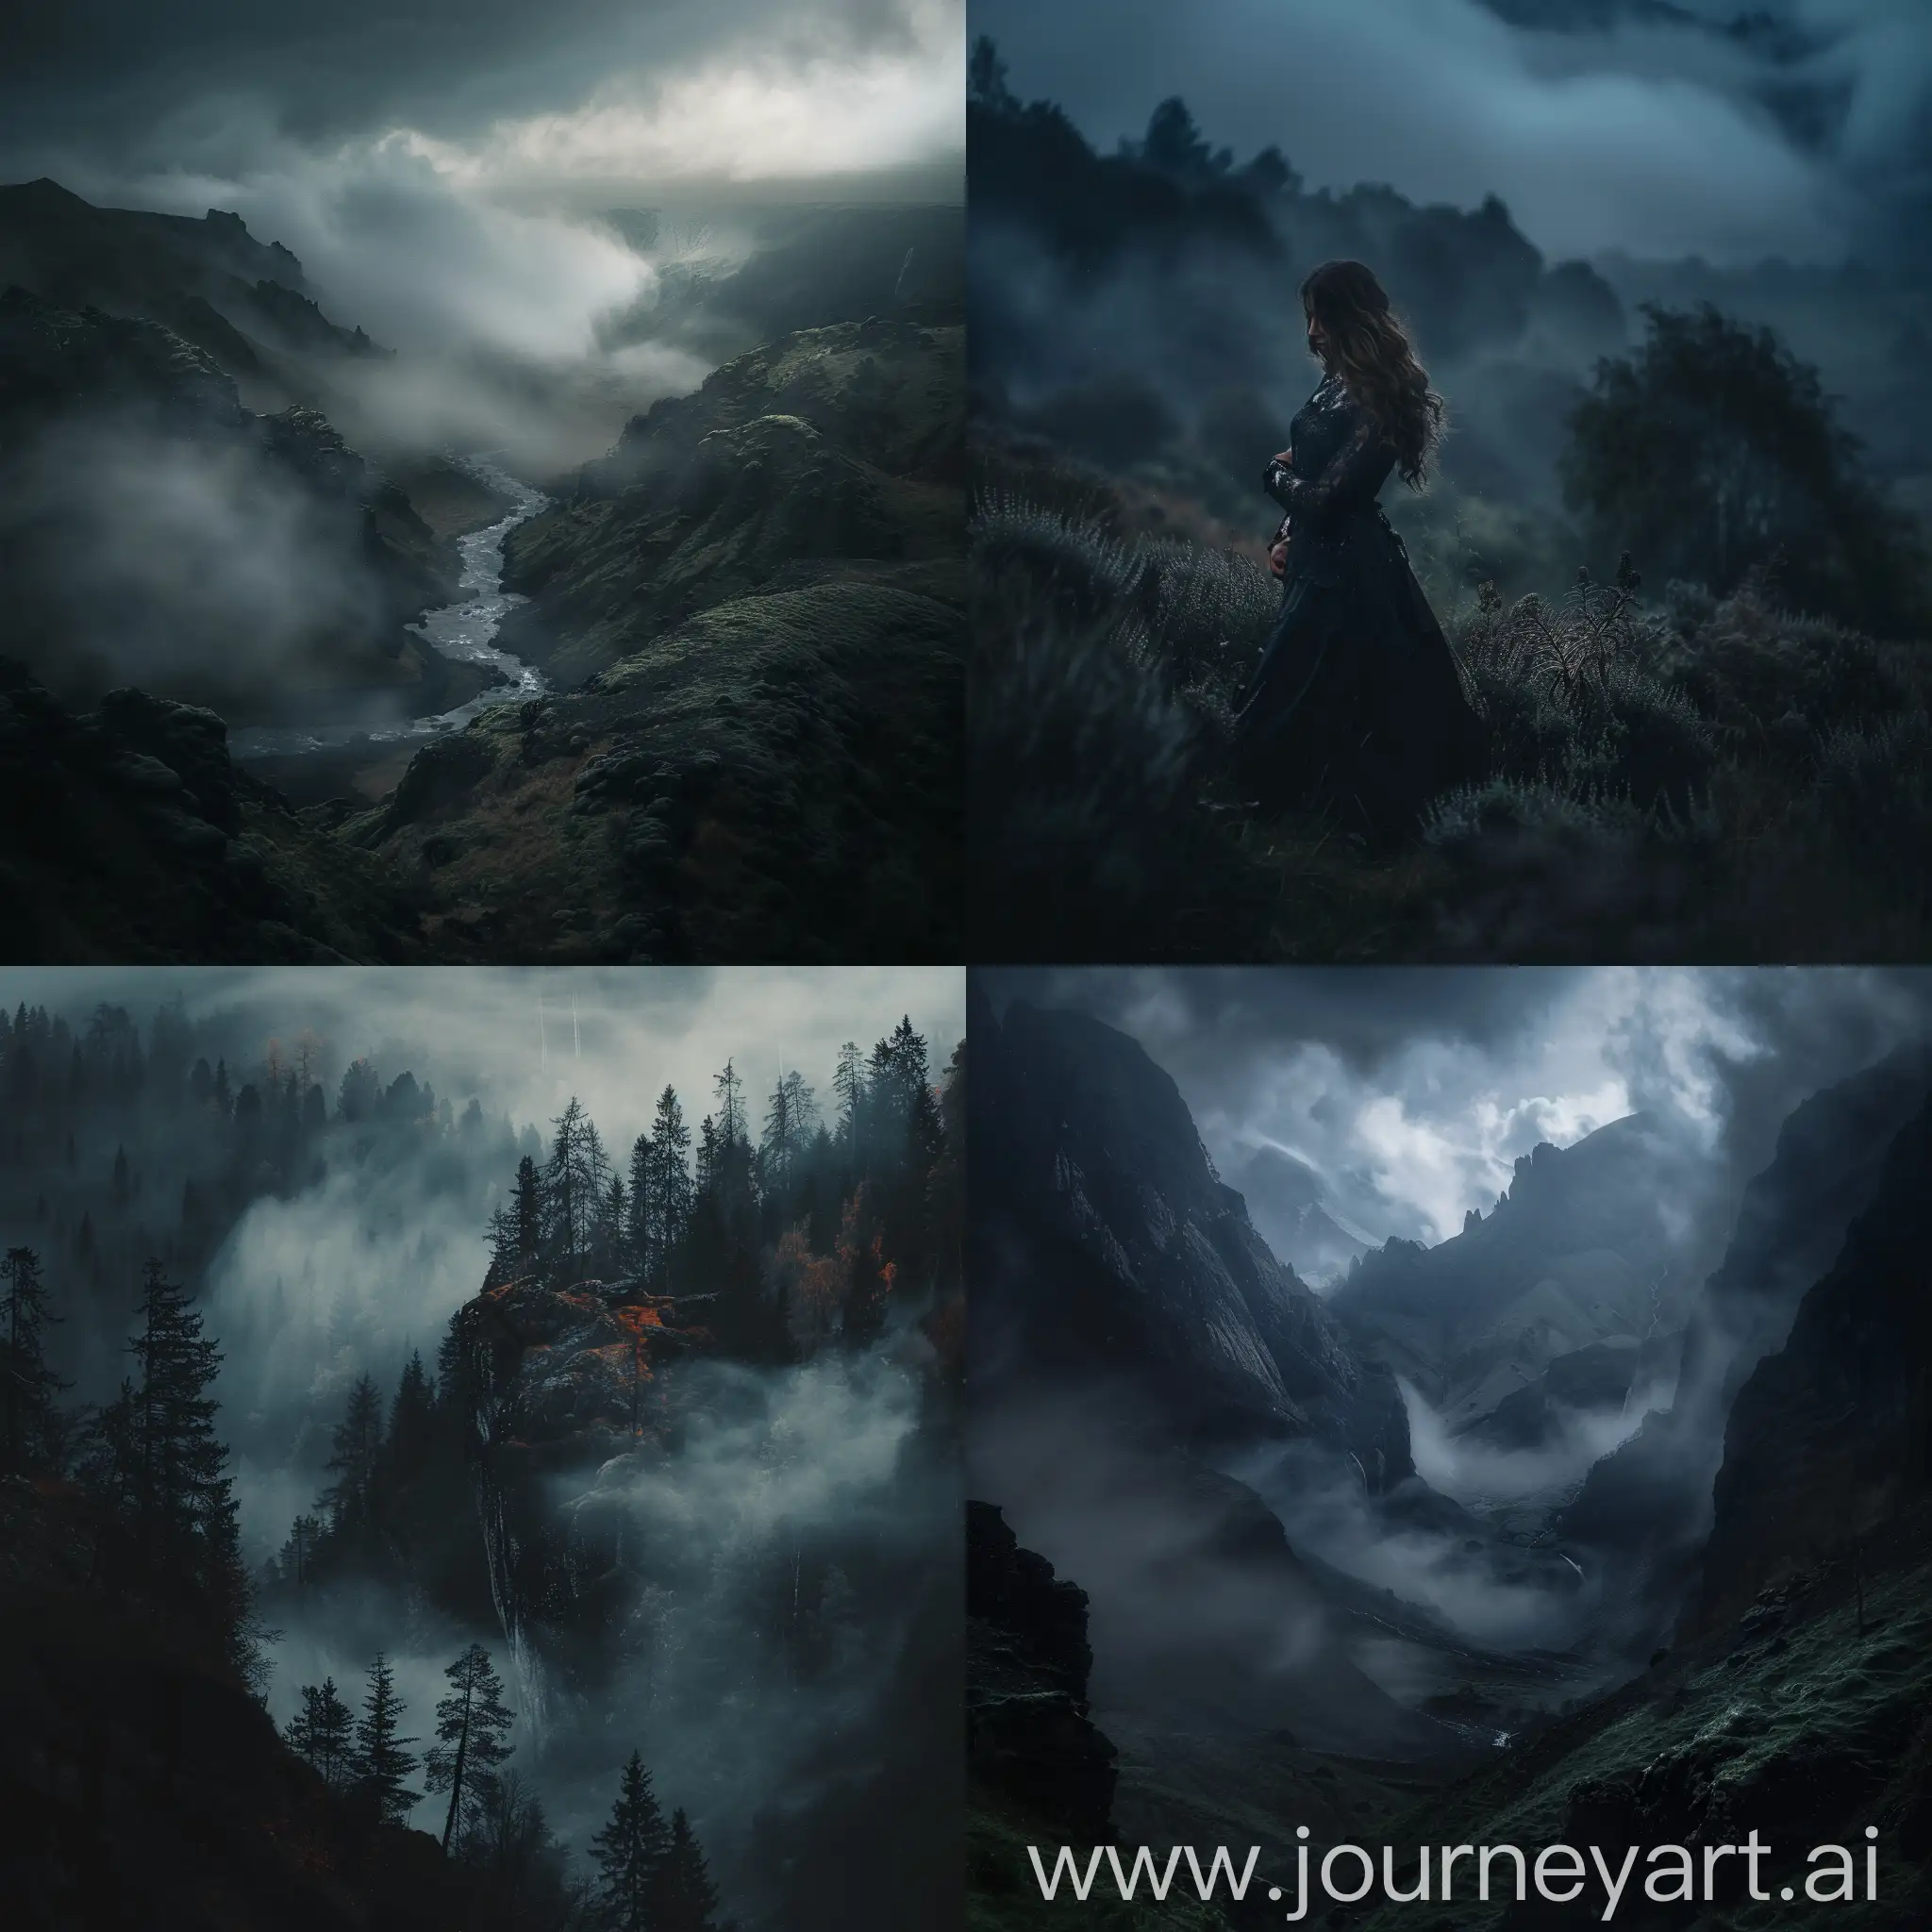 Dreamy-Valley-Photography-with-Dark-Theme-HighQuality-Visuals